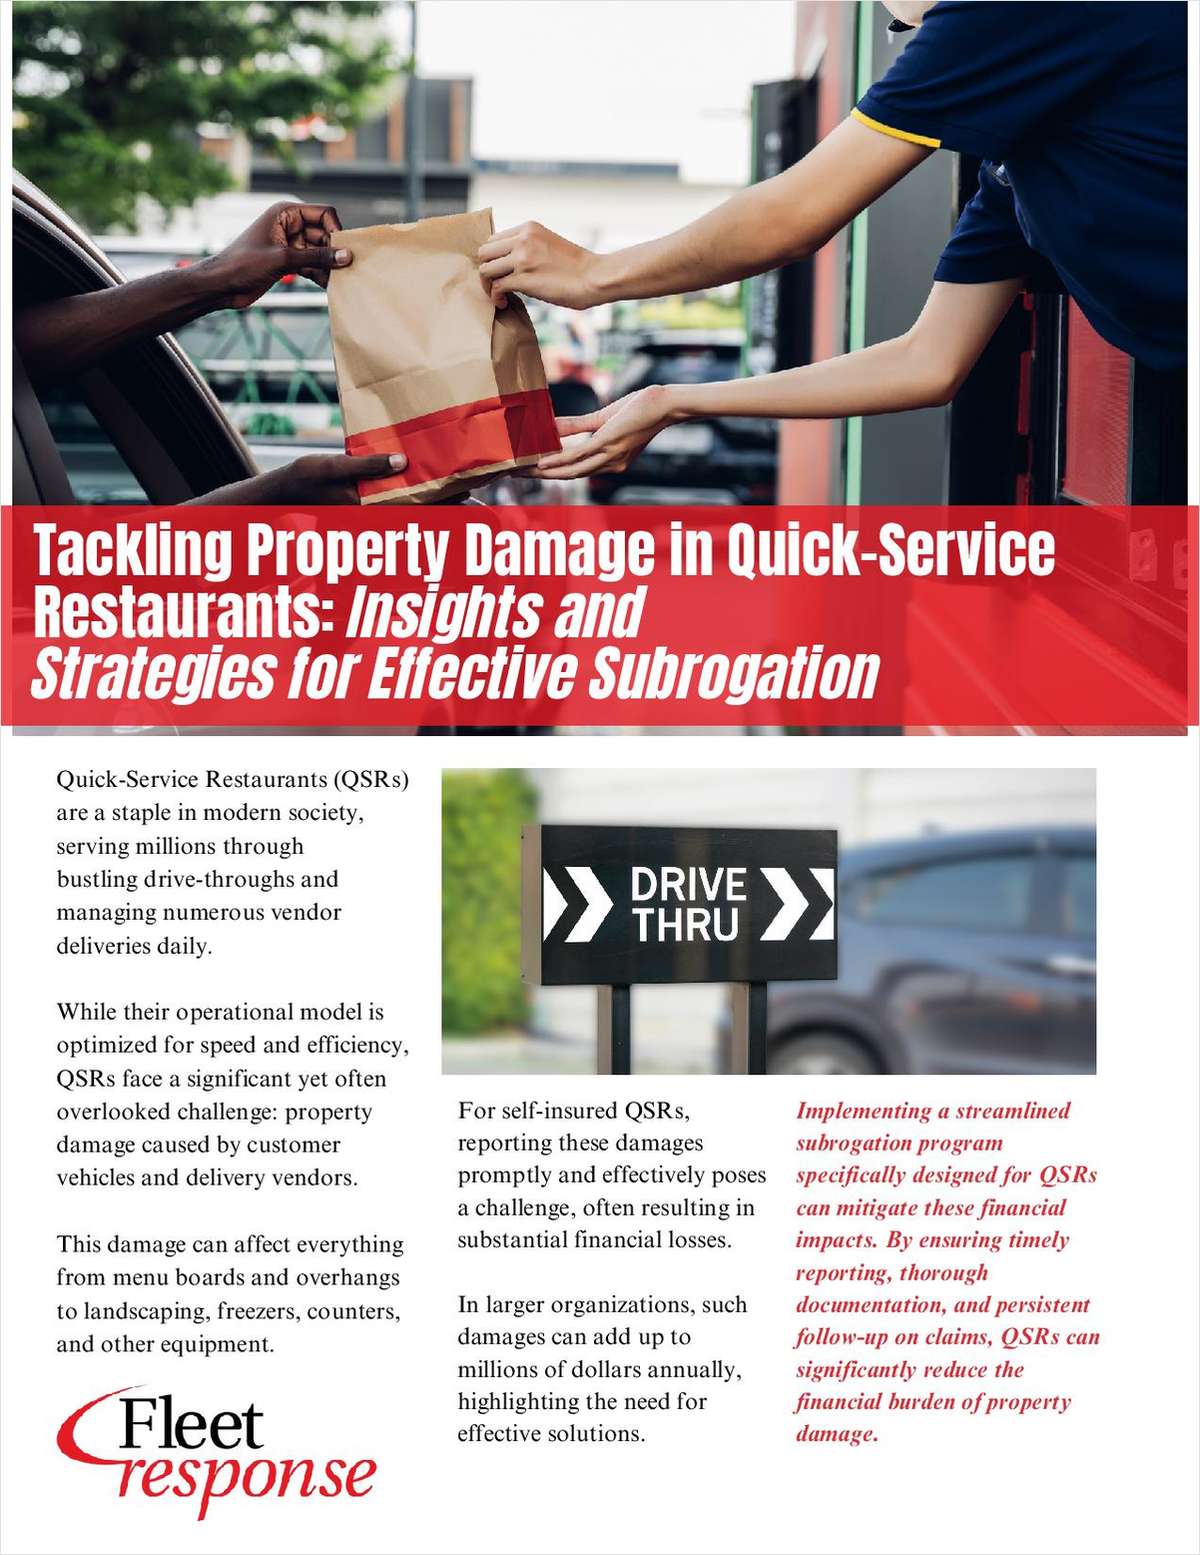 Tackling Property Damage in Quick-Service Restaurants: Insights and Strategies for Effective Subrogation link